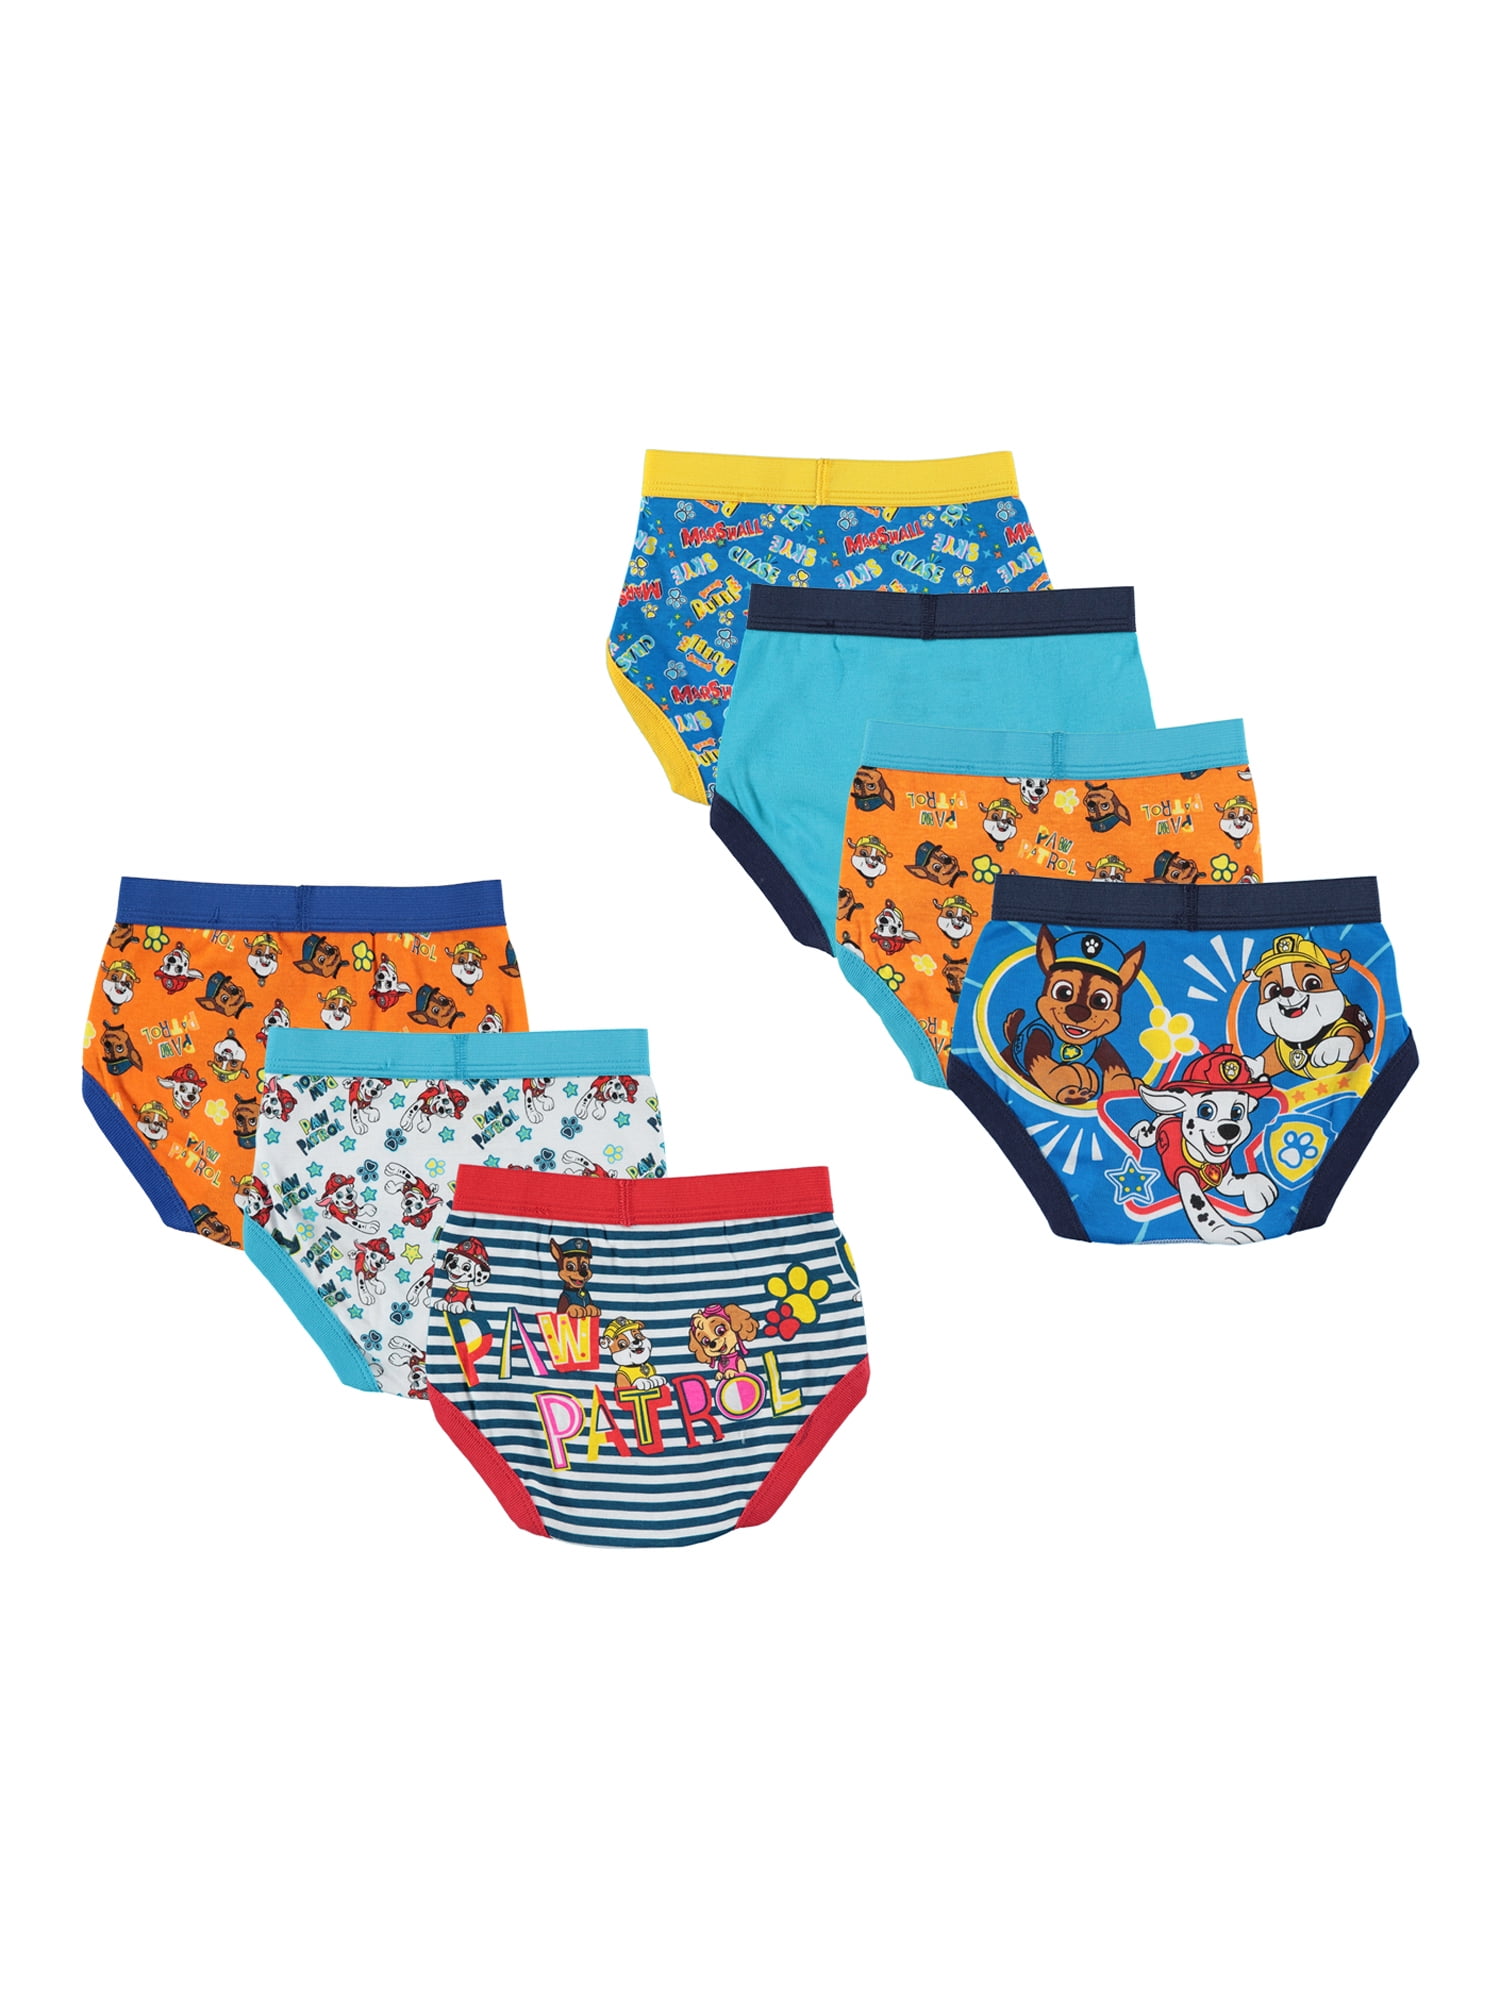 Closet Treasures - Brand new 3 pack Paw Patrol boy's boxer briefs. Sizes: 4  and 6. Price: $5 for each 3 pack.